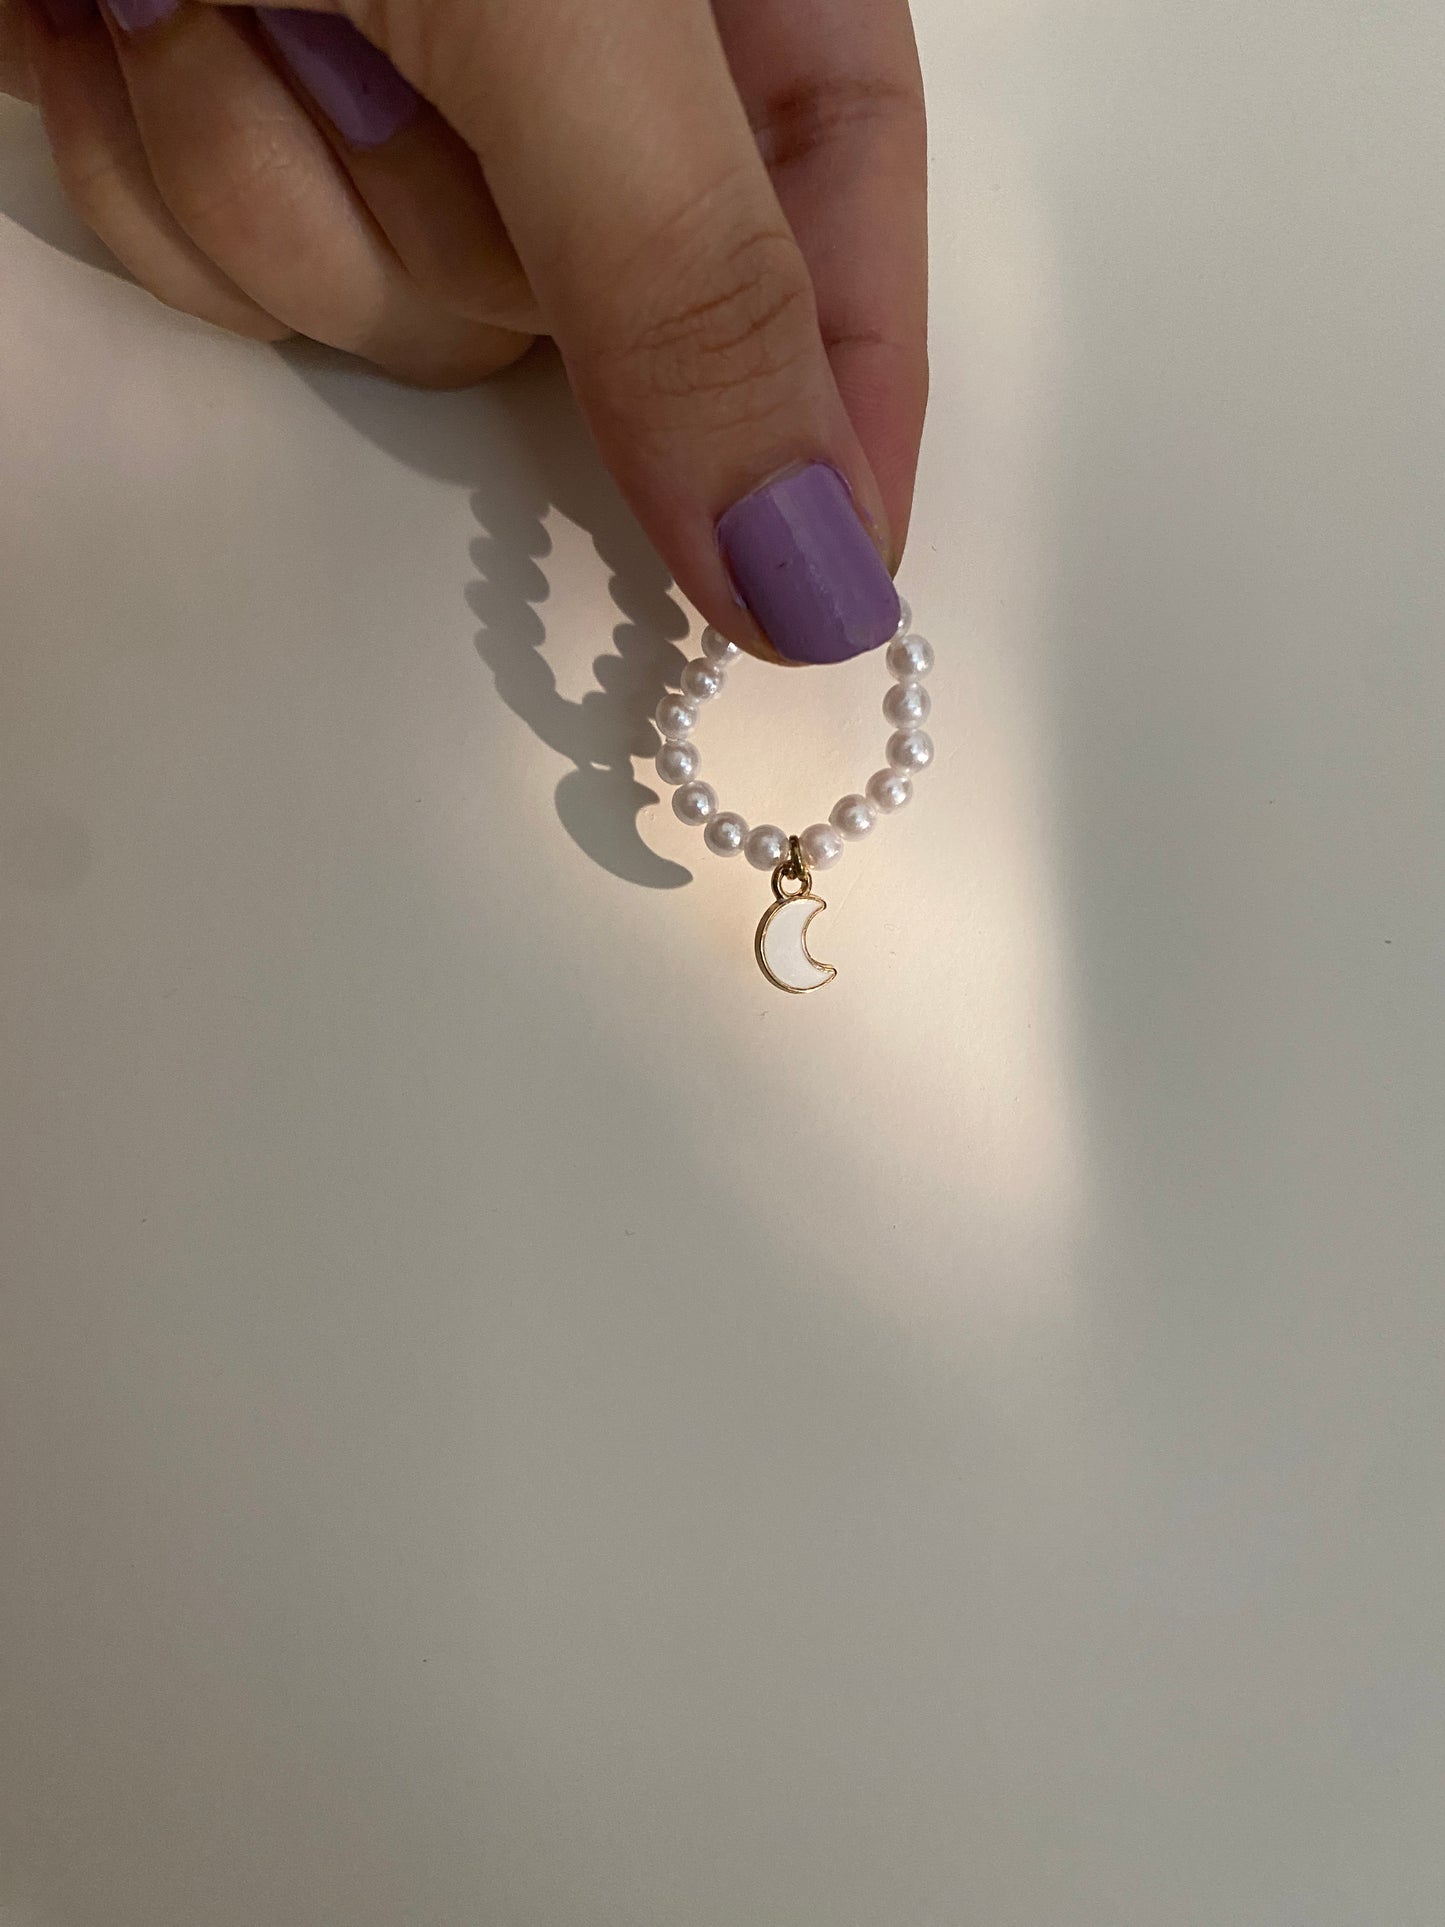 CRESCENT MOON HANGING ON PEARLS - RING